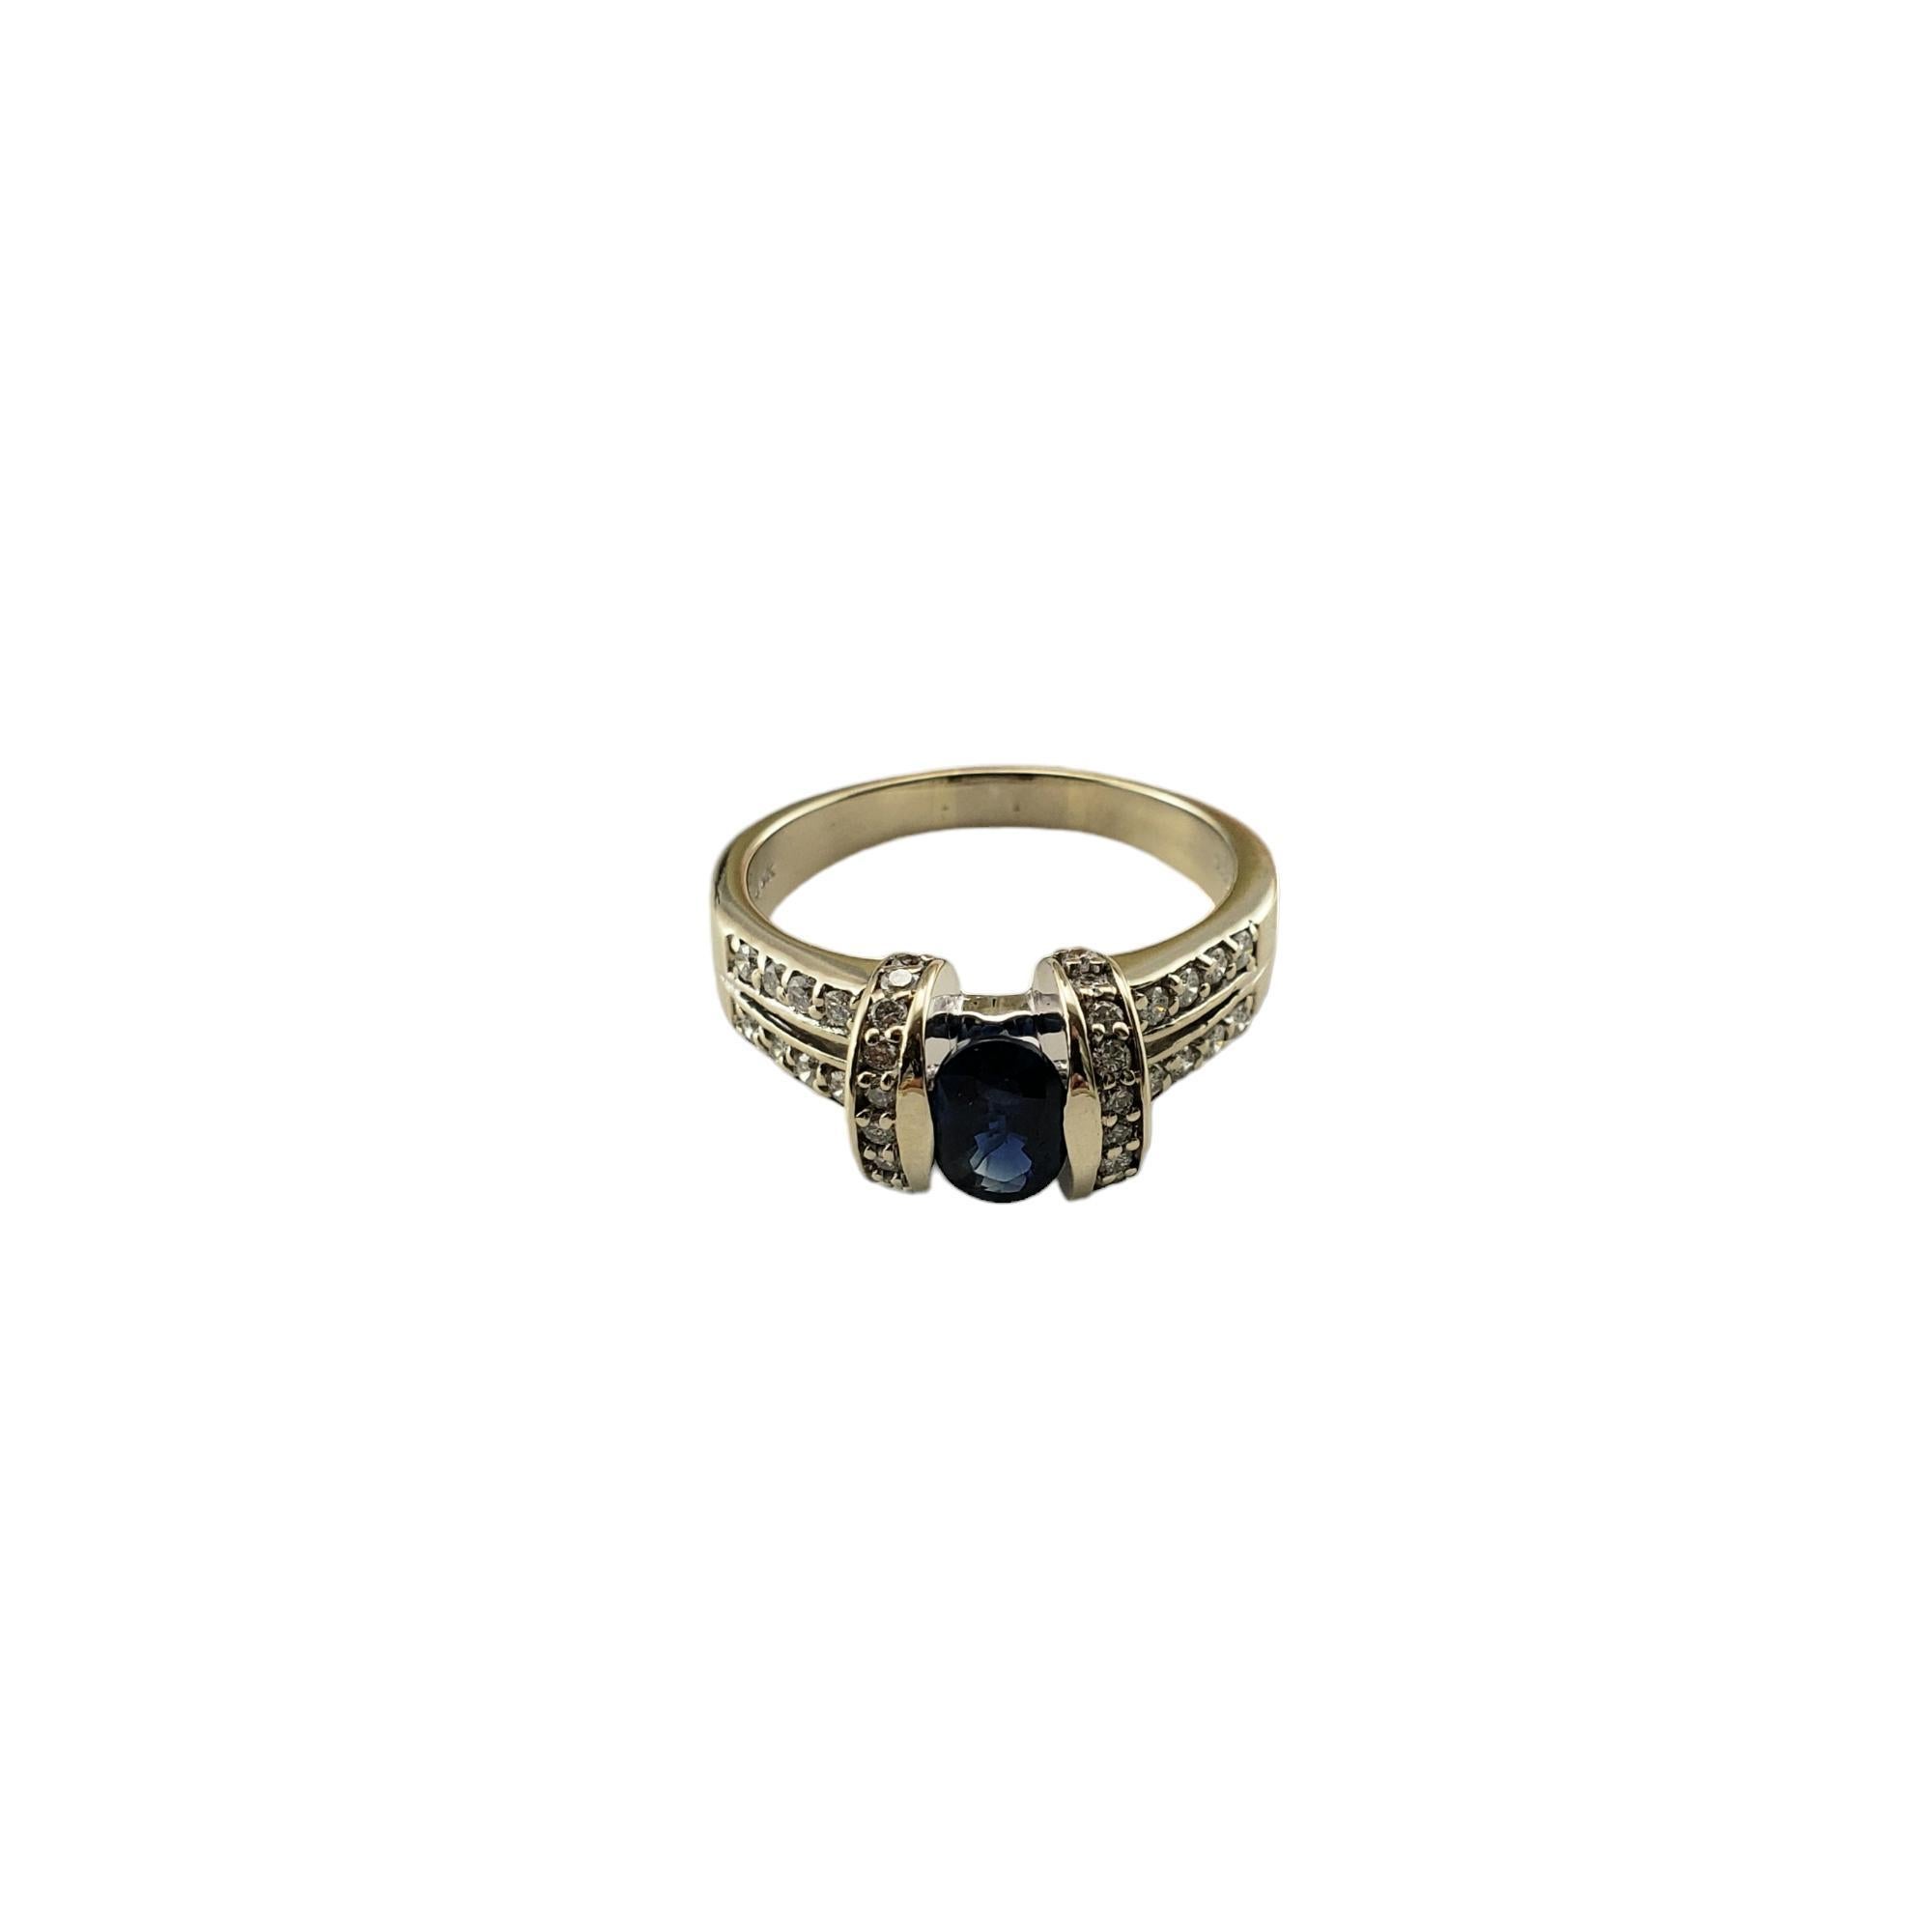 Vintage 14K White Gold Sapphire and Diamond Ring Size 9 JAGi Certified-

This elegant ring features one oval blue sapphire (6.8 mm x 5.2 mm) and 36 round brilliant cut diamonds set in classic 14K white gold.  Width: 9 mm.  Shank: 3 mm. 

Sapphire